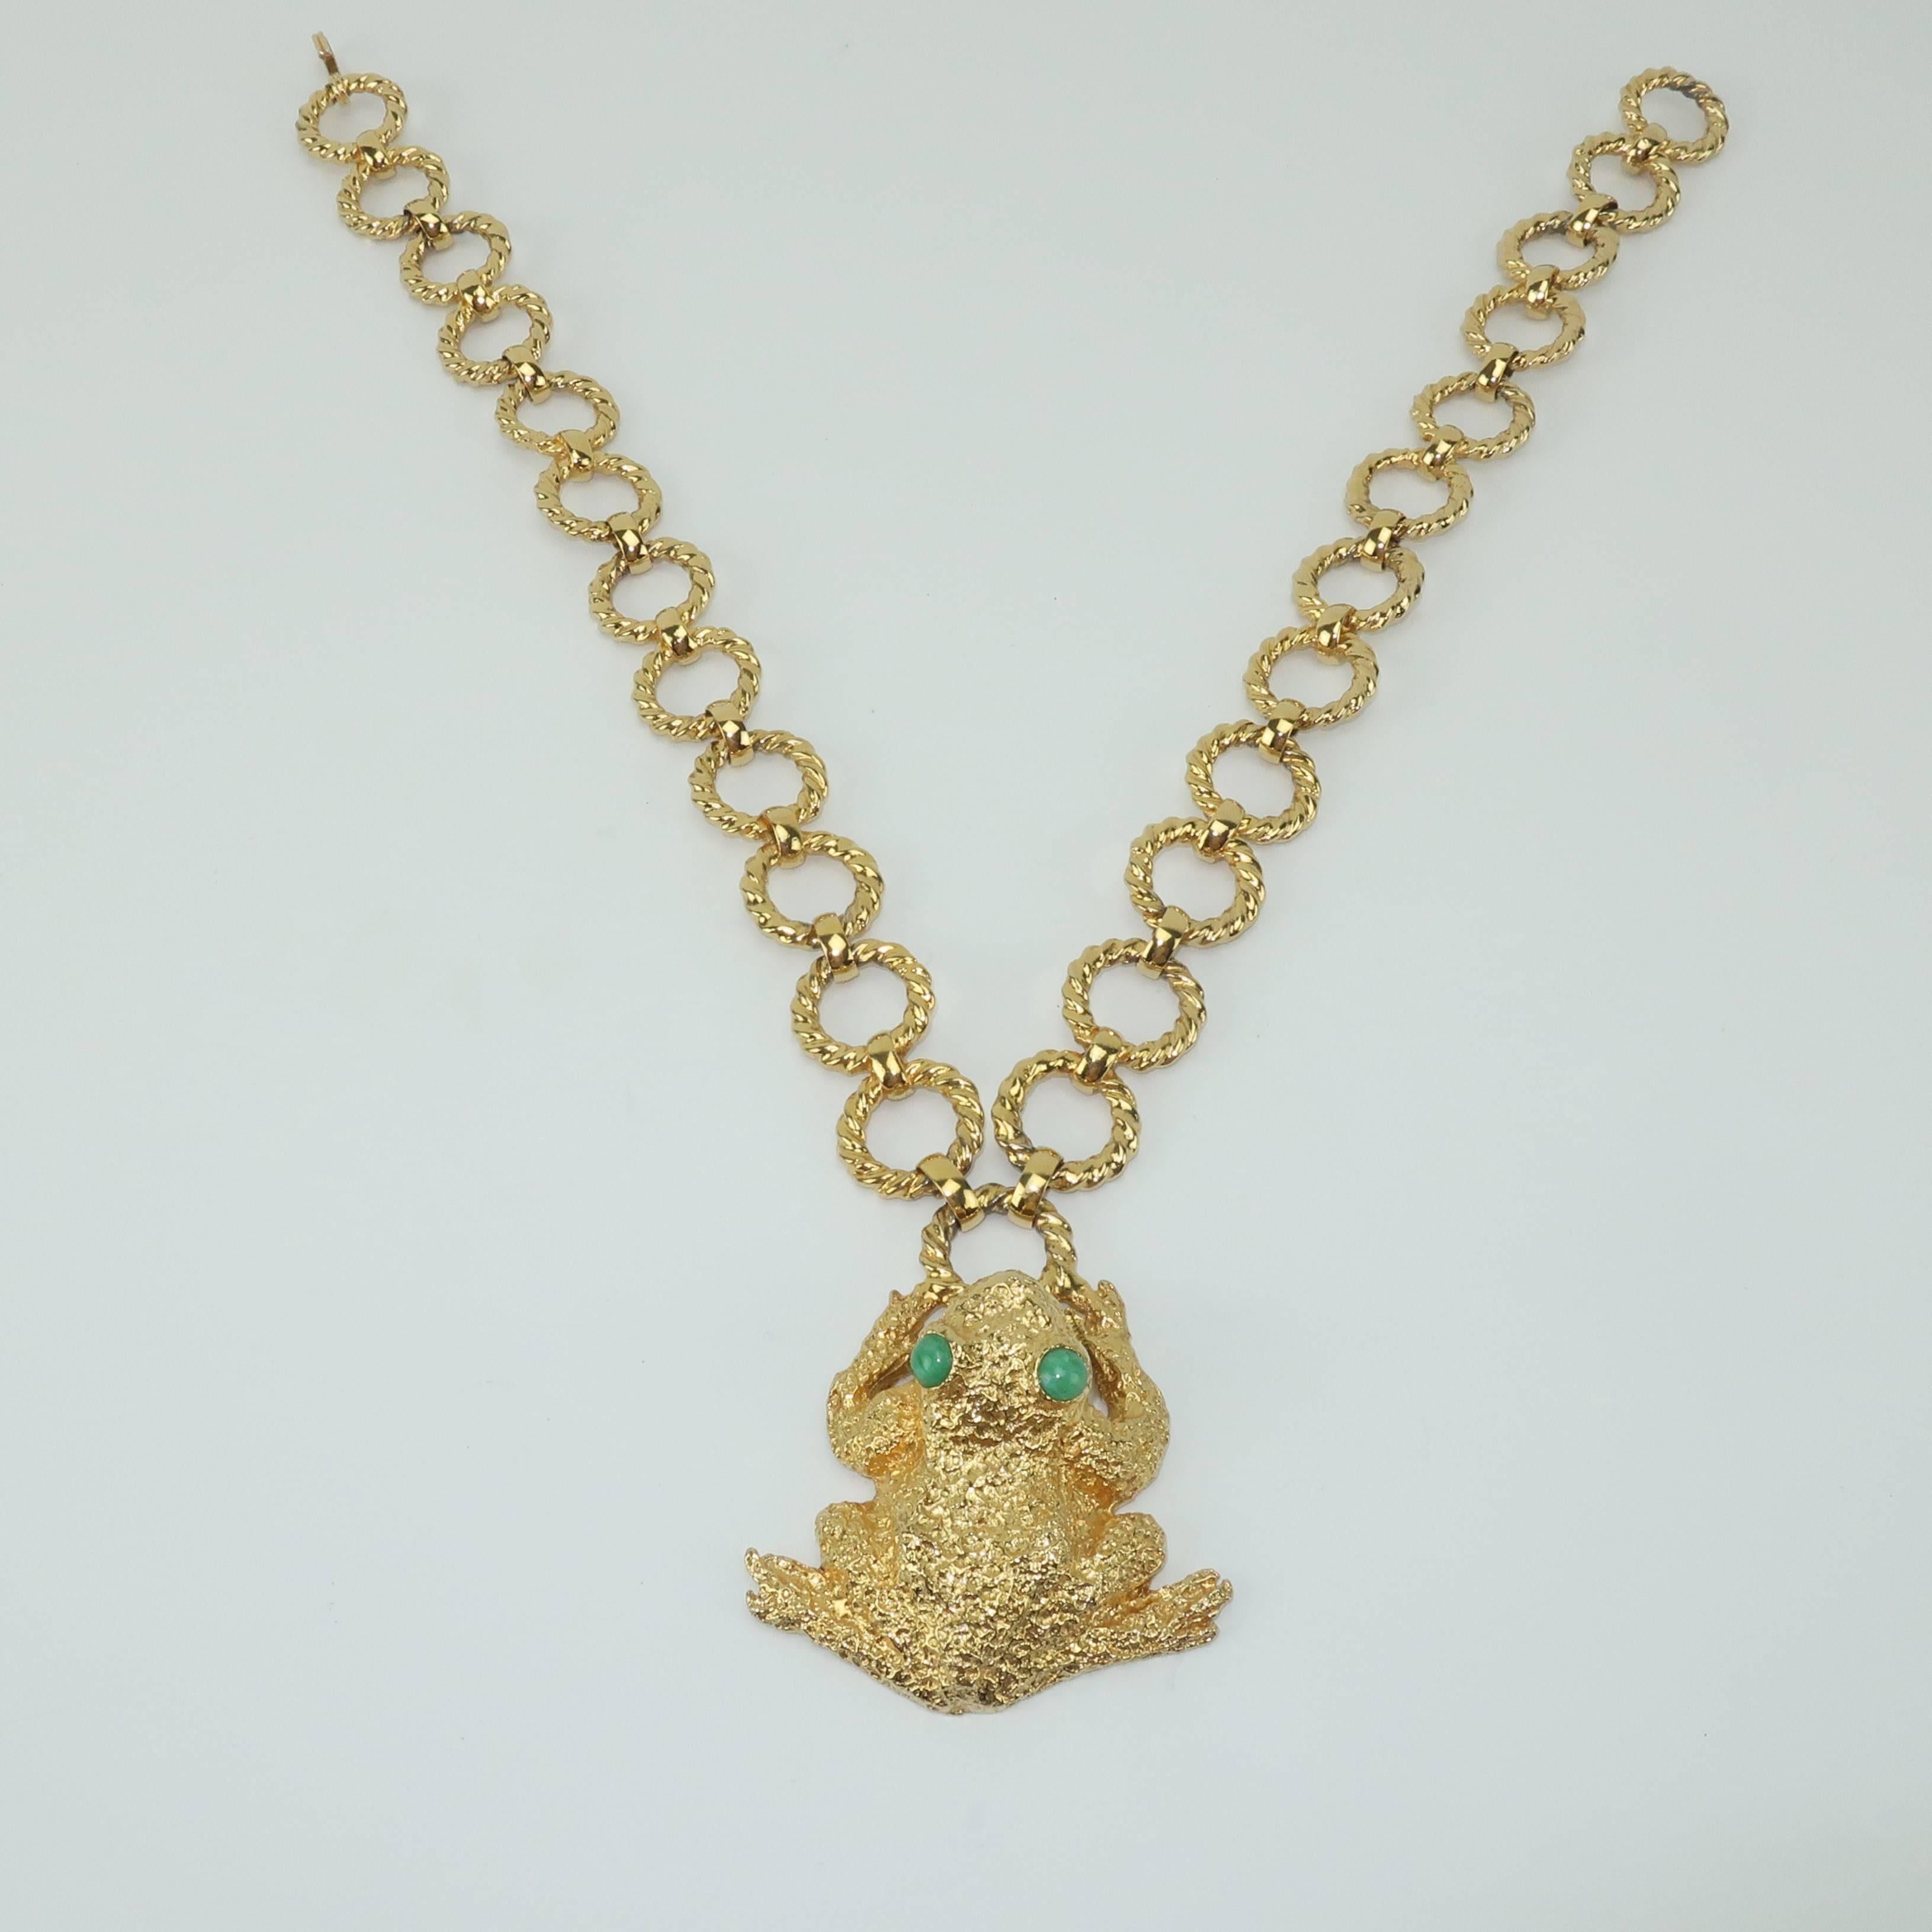 1971 Mimi di N Gold Tone Frog Statement Necklace 1